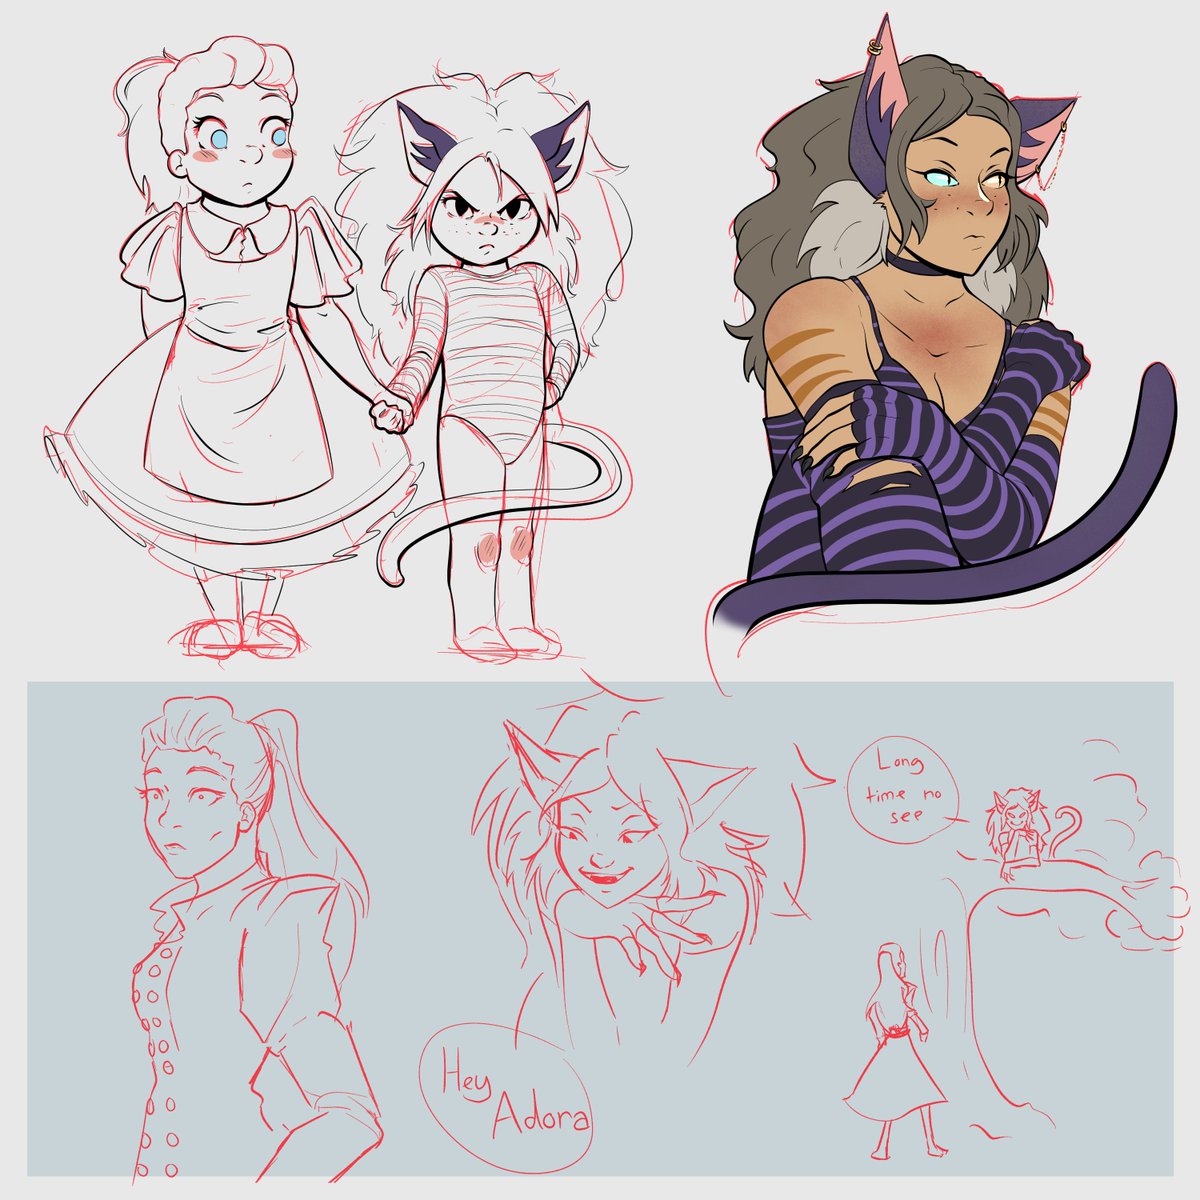 Alice in Wonderland AU doodles I finished for Patreon 🧡 I think I need to draw this version of Catradora properly!